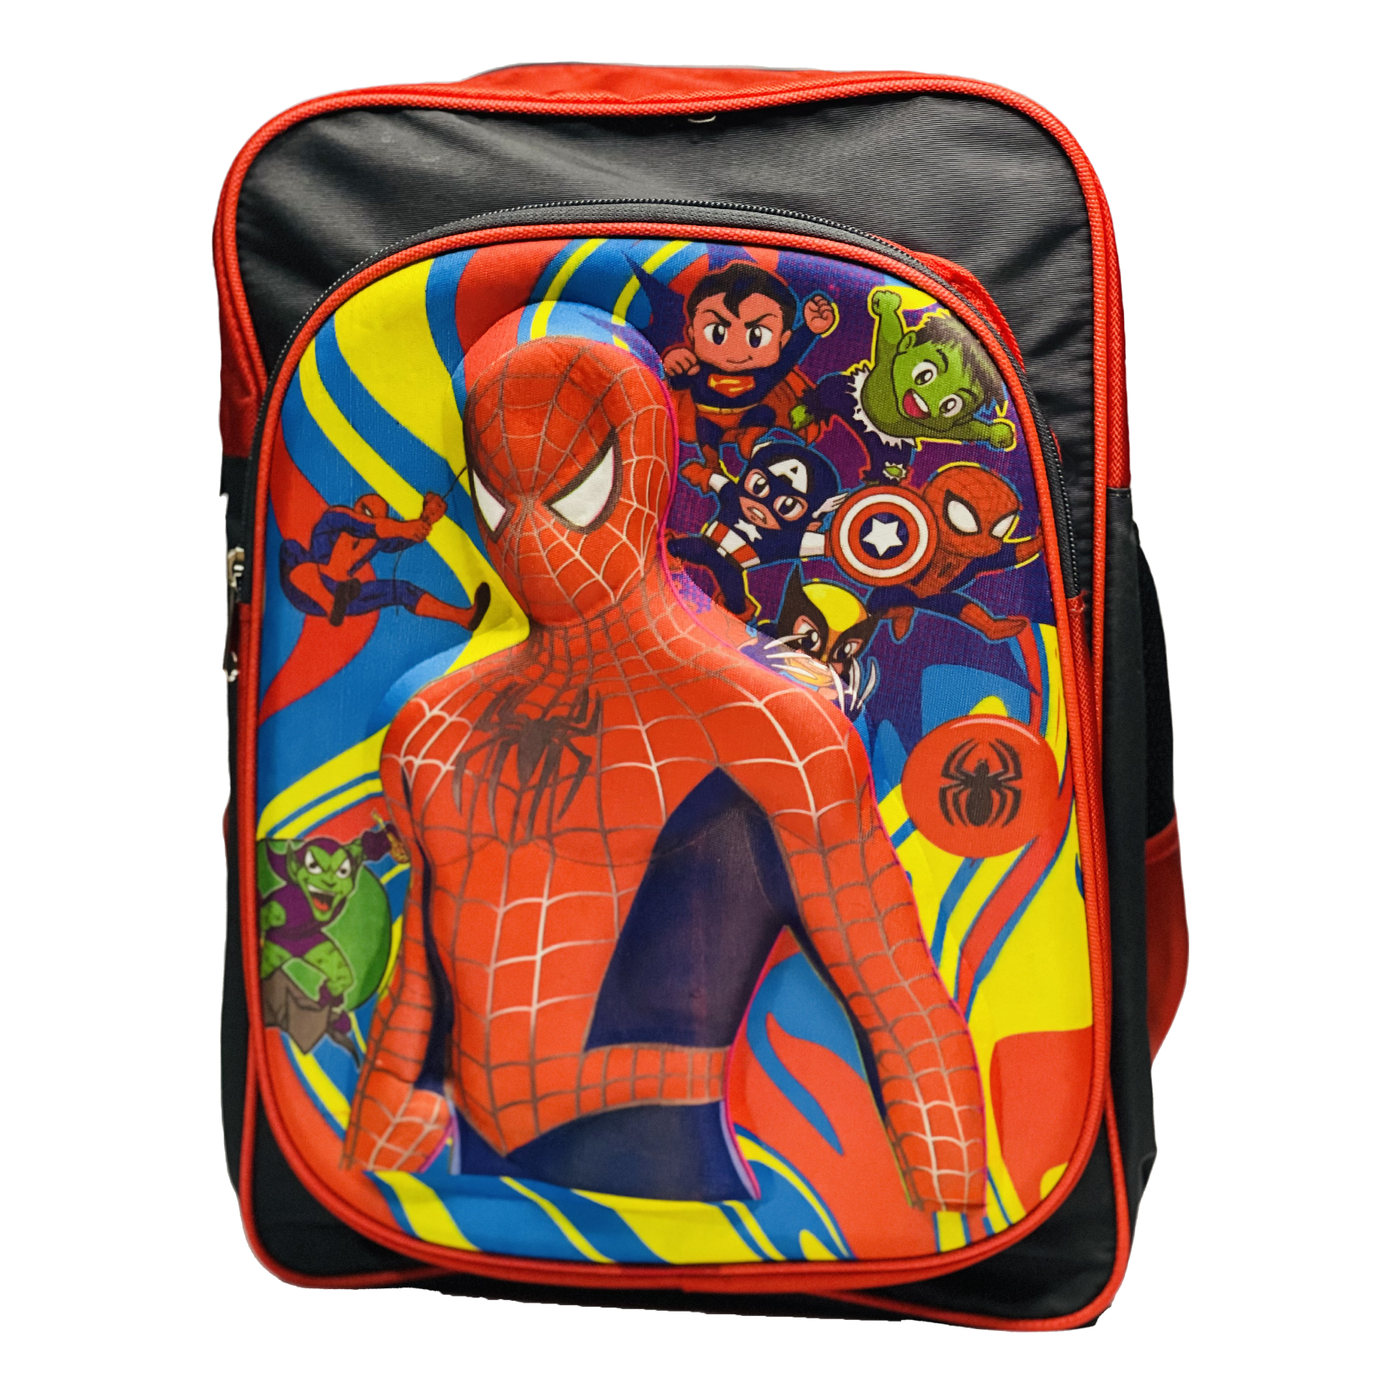 AD35 SPIDERMAN EASY CARRY (KIDS BAG)